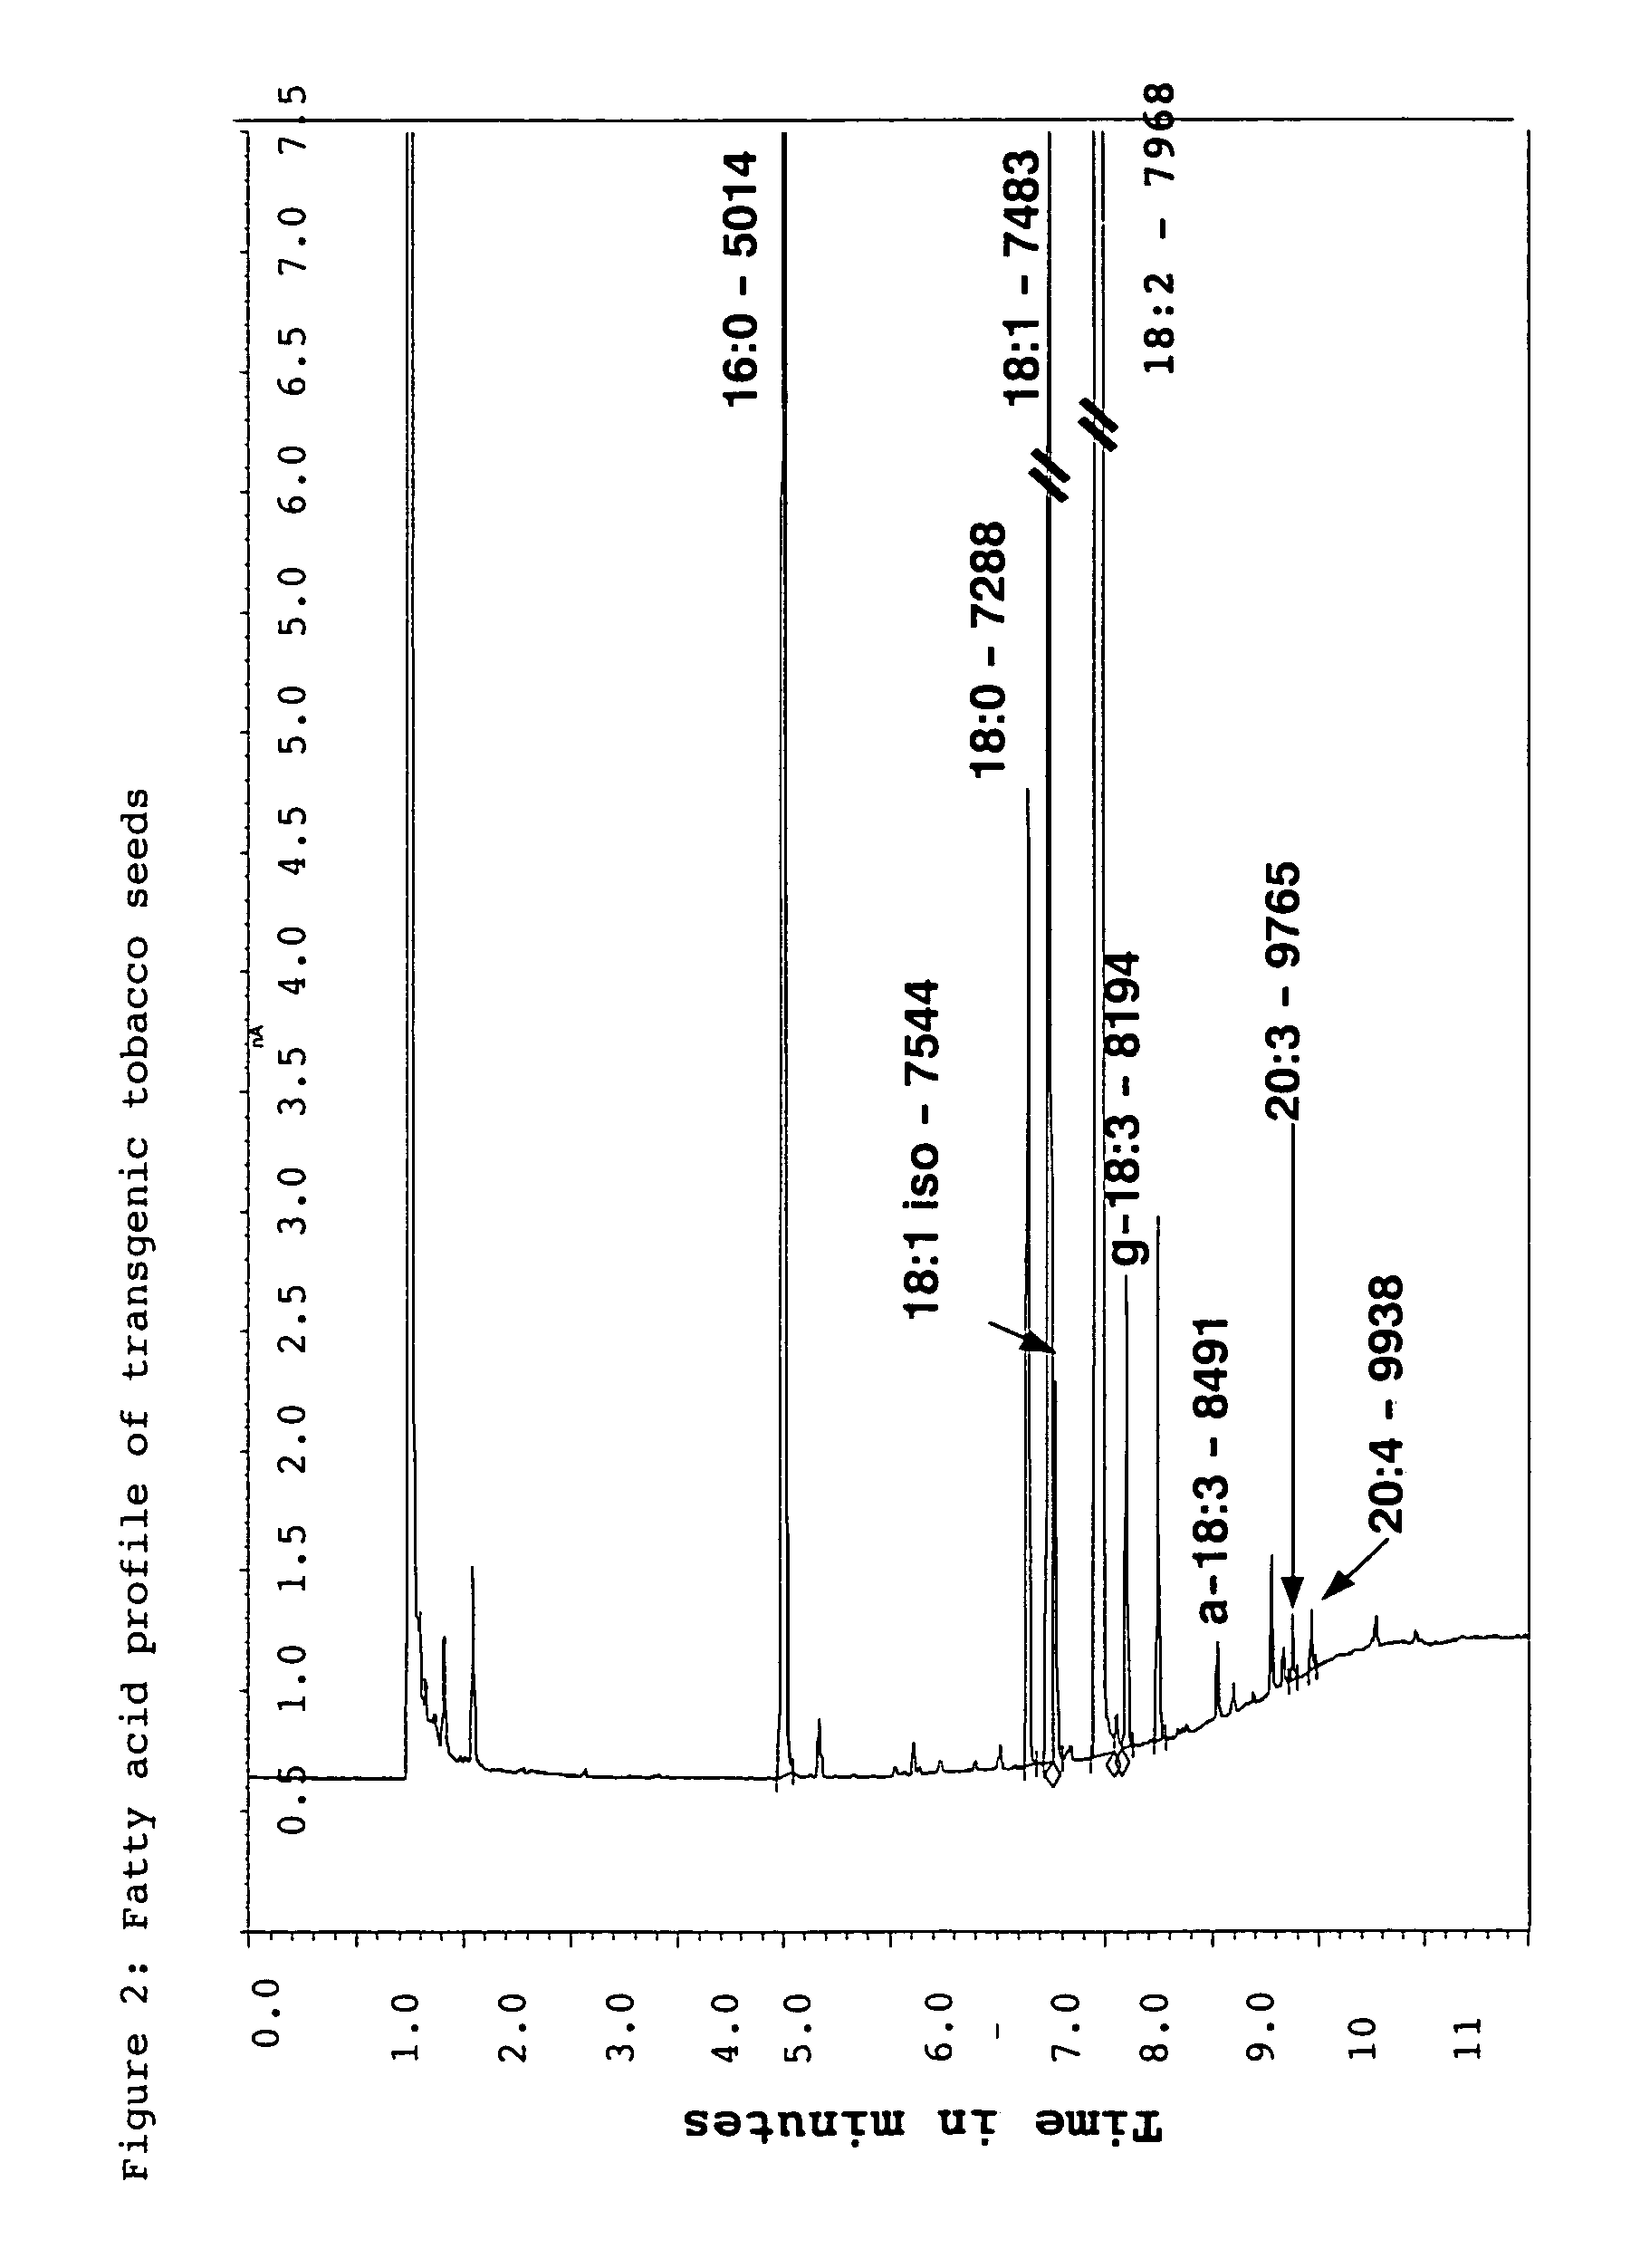 Method for producing multiple unsaturated fatty acids in plants